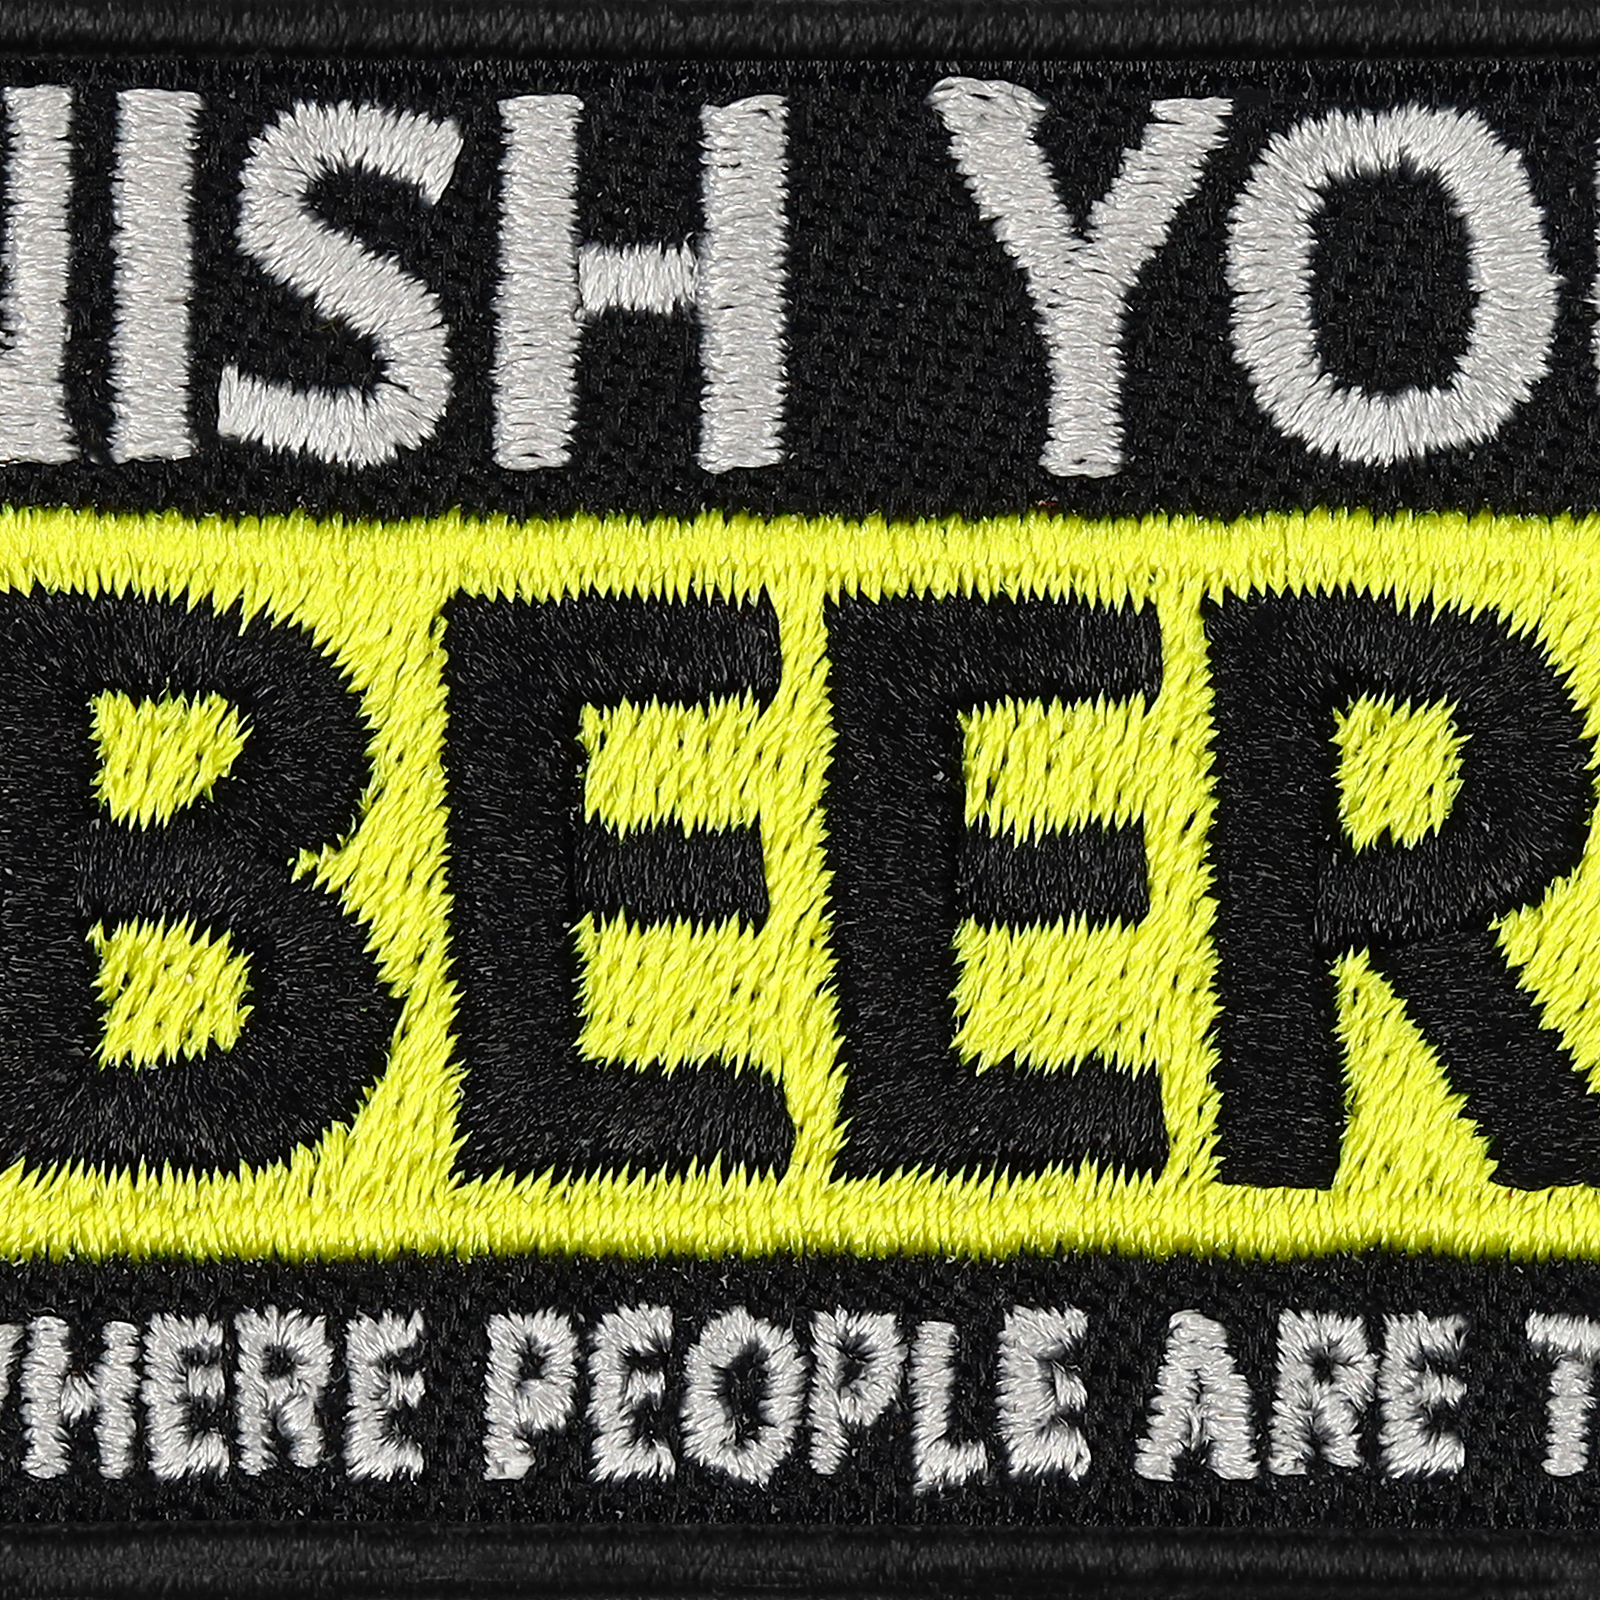 Finish your beer... somewhere people are thirsty - Patch